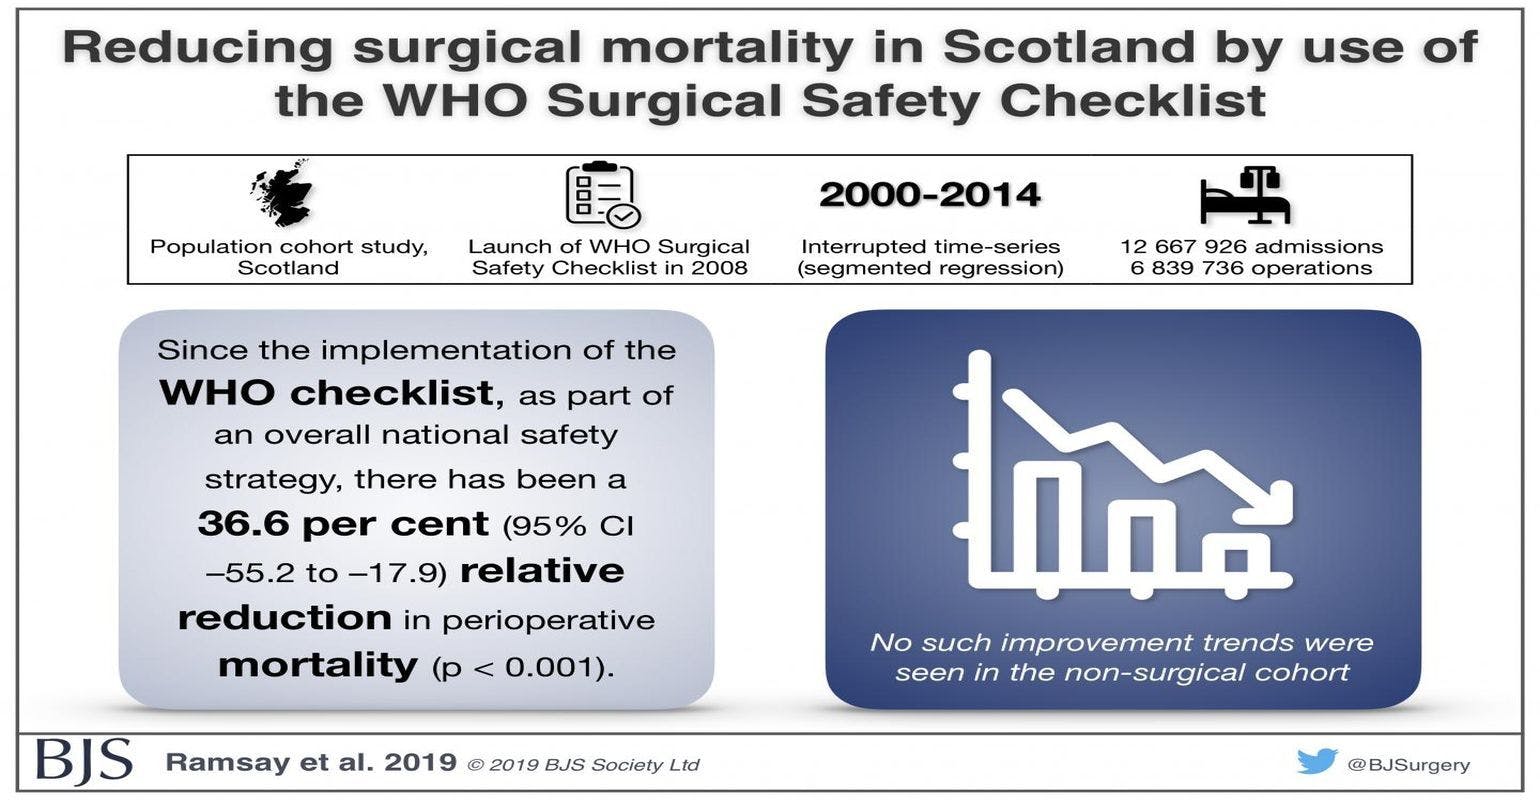 Post-Surgical Hospital Deaths Decline After Launch of Surgical Safety Checklists in Scotland